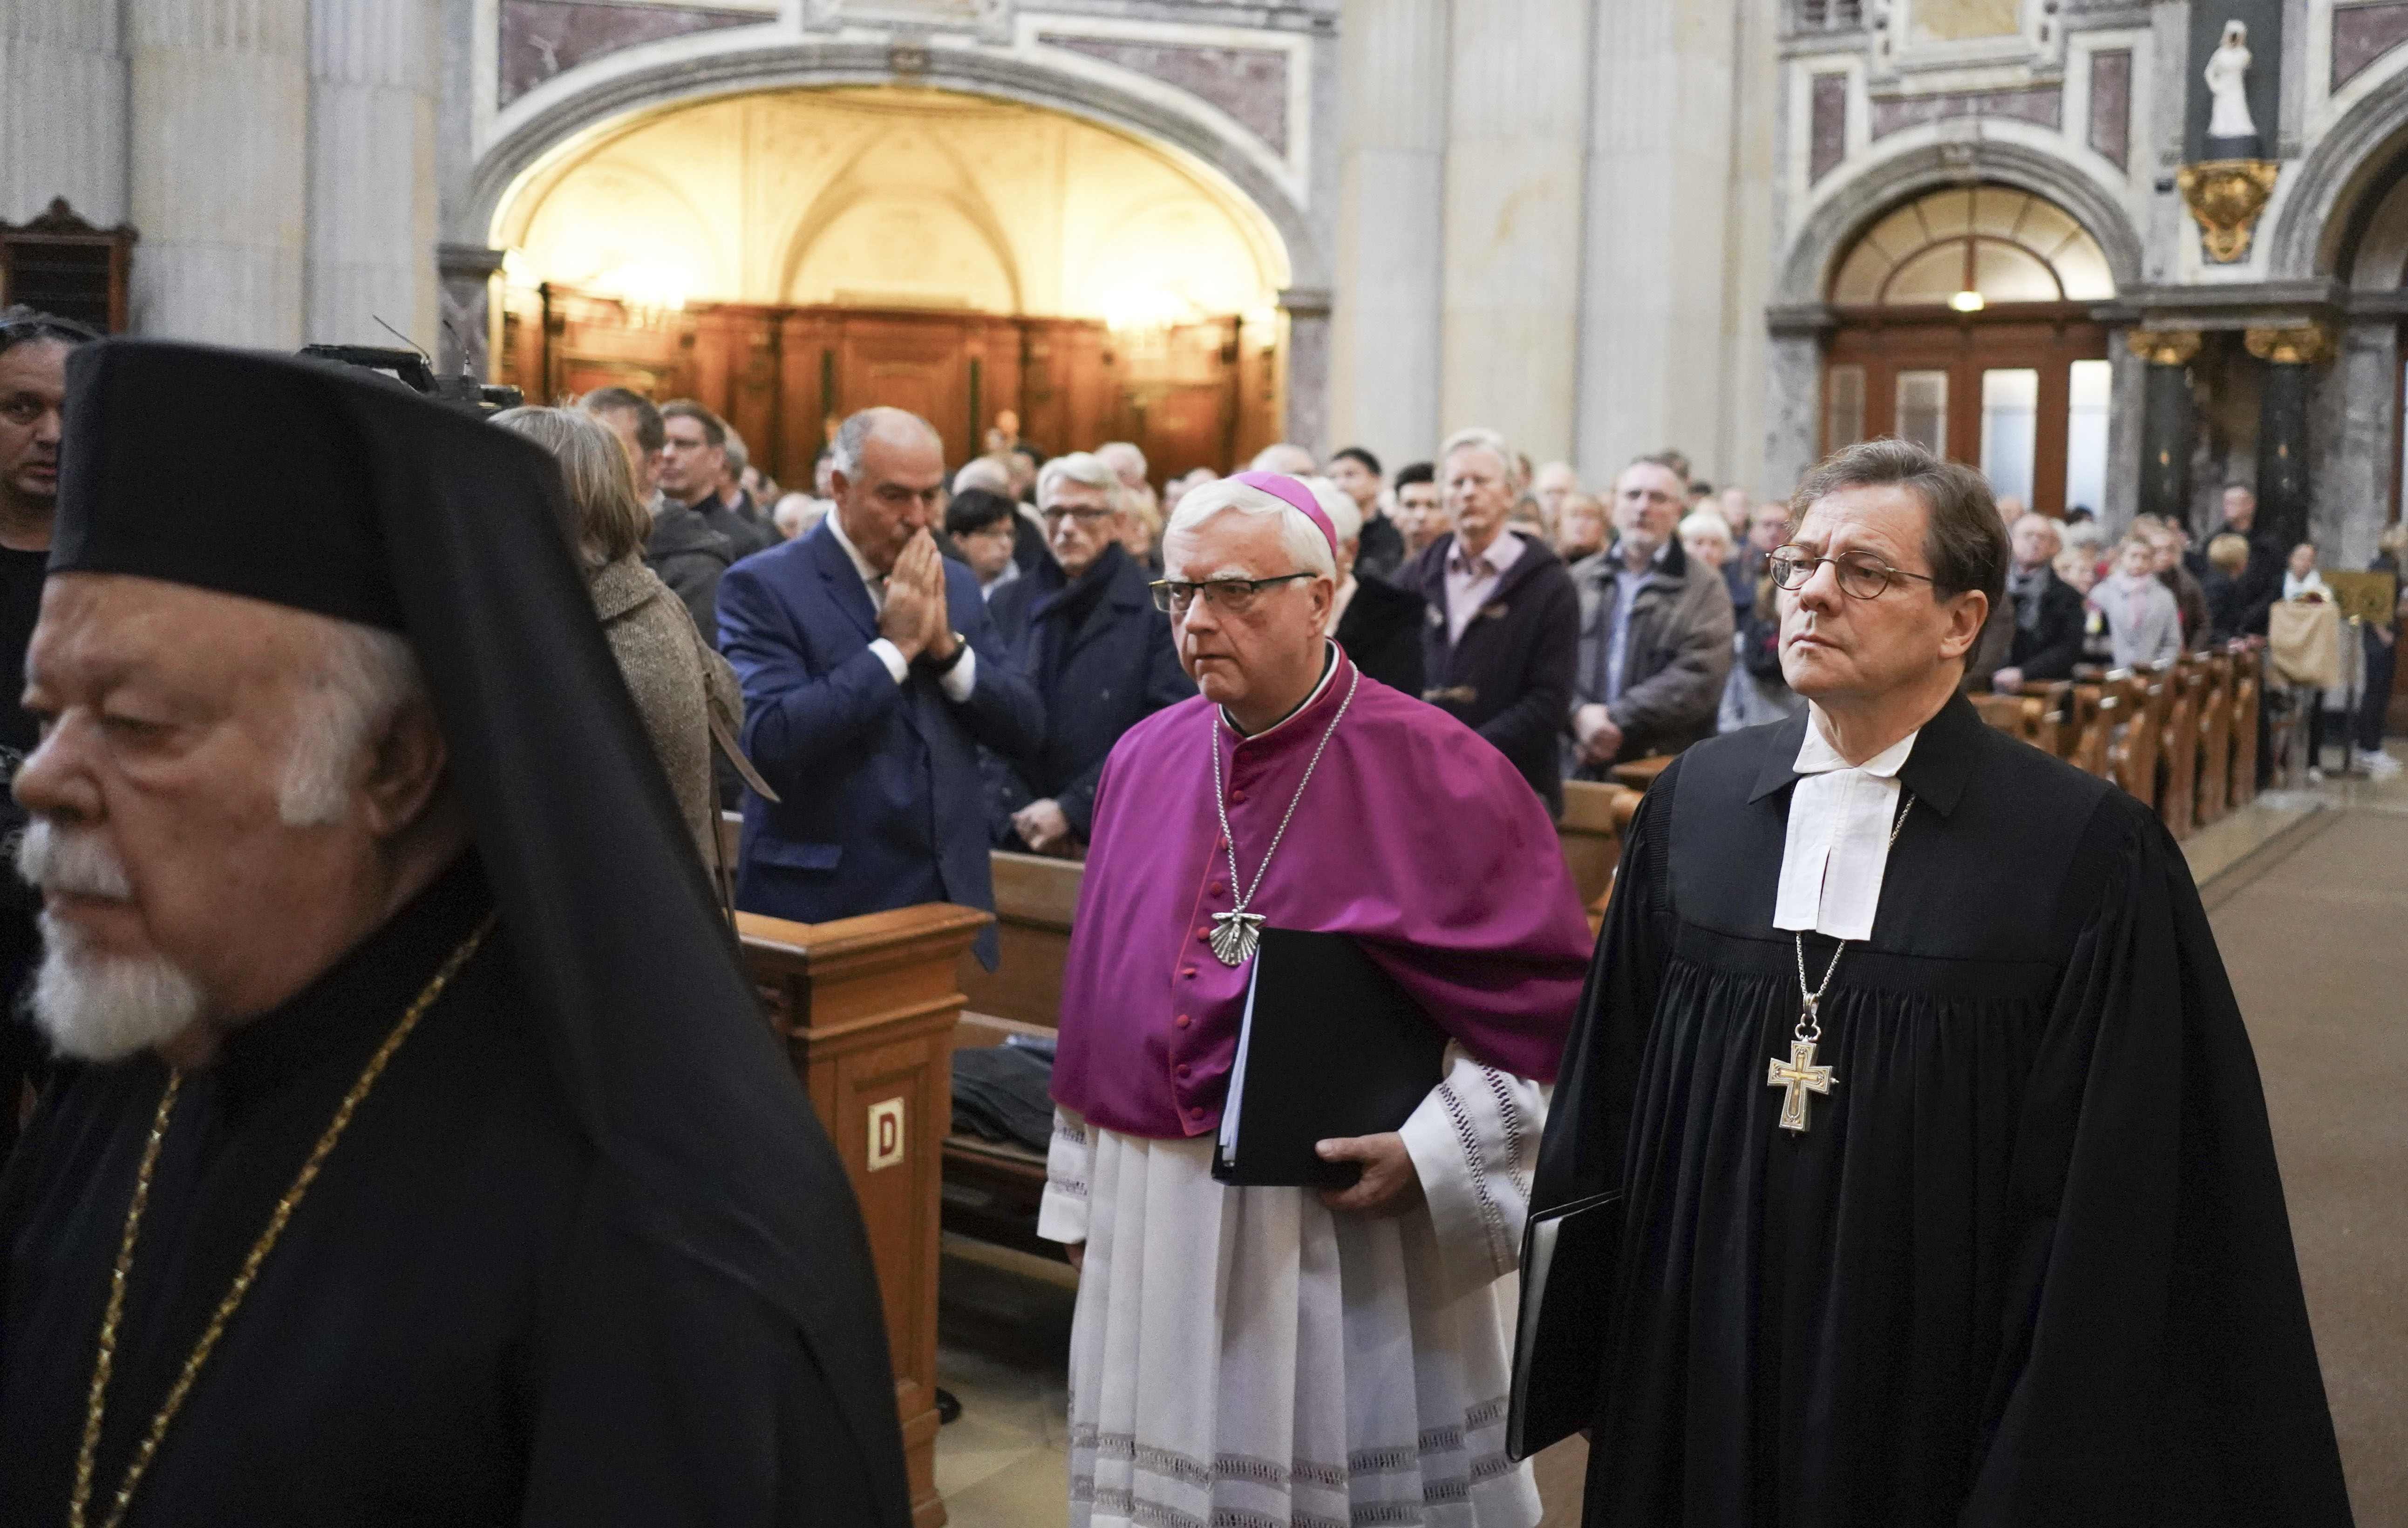 11 November 2018, Berlin: Archbishop Heiner Koch (2nd from left) and Bishop Markus Dr'ge (r) move into the Berlin Cathedral during an ecumenical service commemorating the end of the First World War. The service is organized by the Evangelical Church in Germany (EKD), the German Bishops' Conference (DBK), the Evangelical Church Berlin-Brandenburg-Schlesische Oberlausitz (EKBO) and the Archdiocese of Berlin. Photo by: J'rg Carstensen/picture-alliance/dpa/AP Images